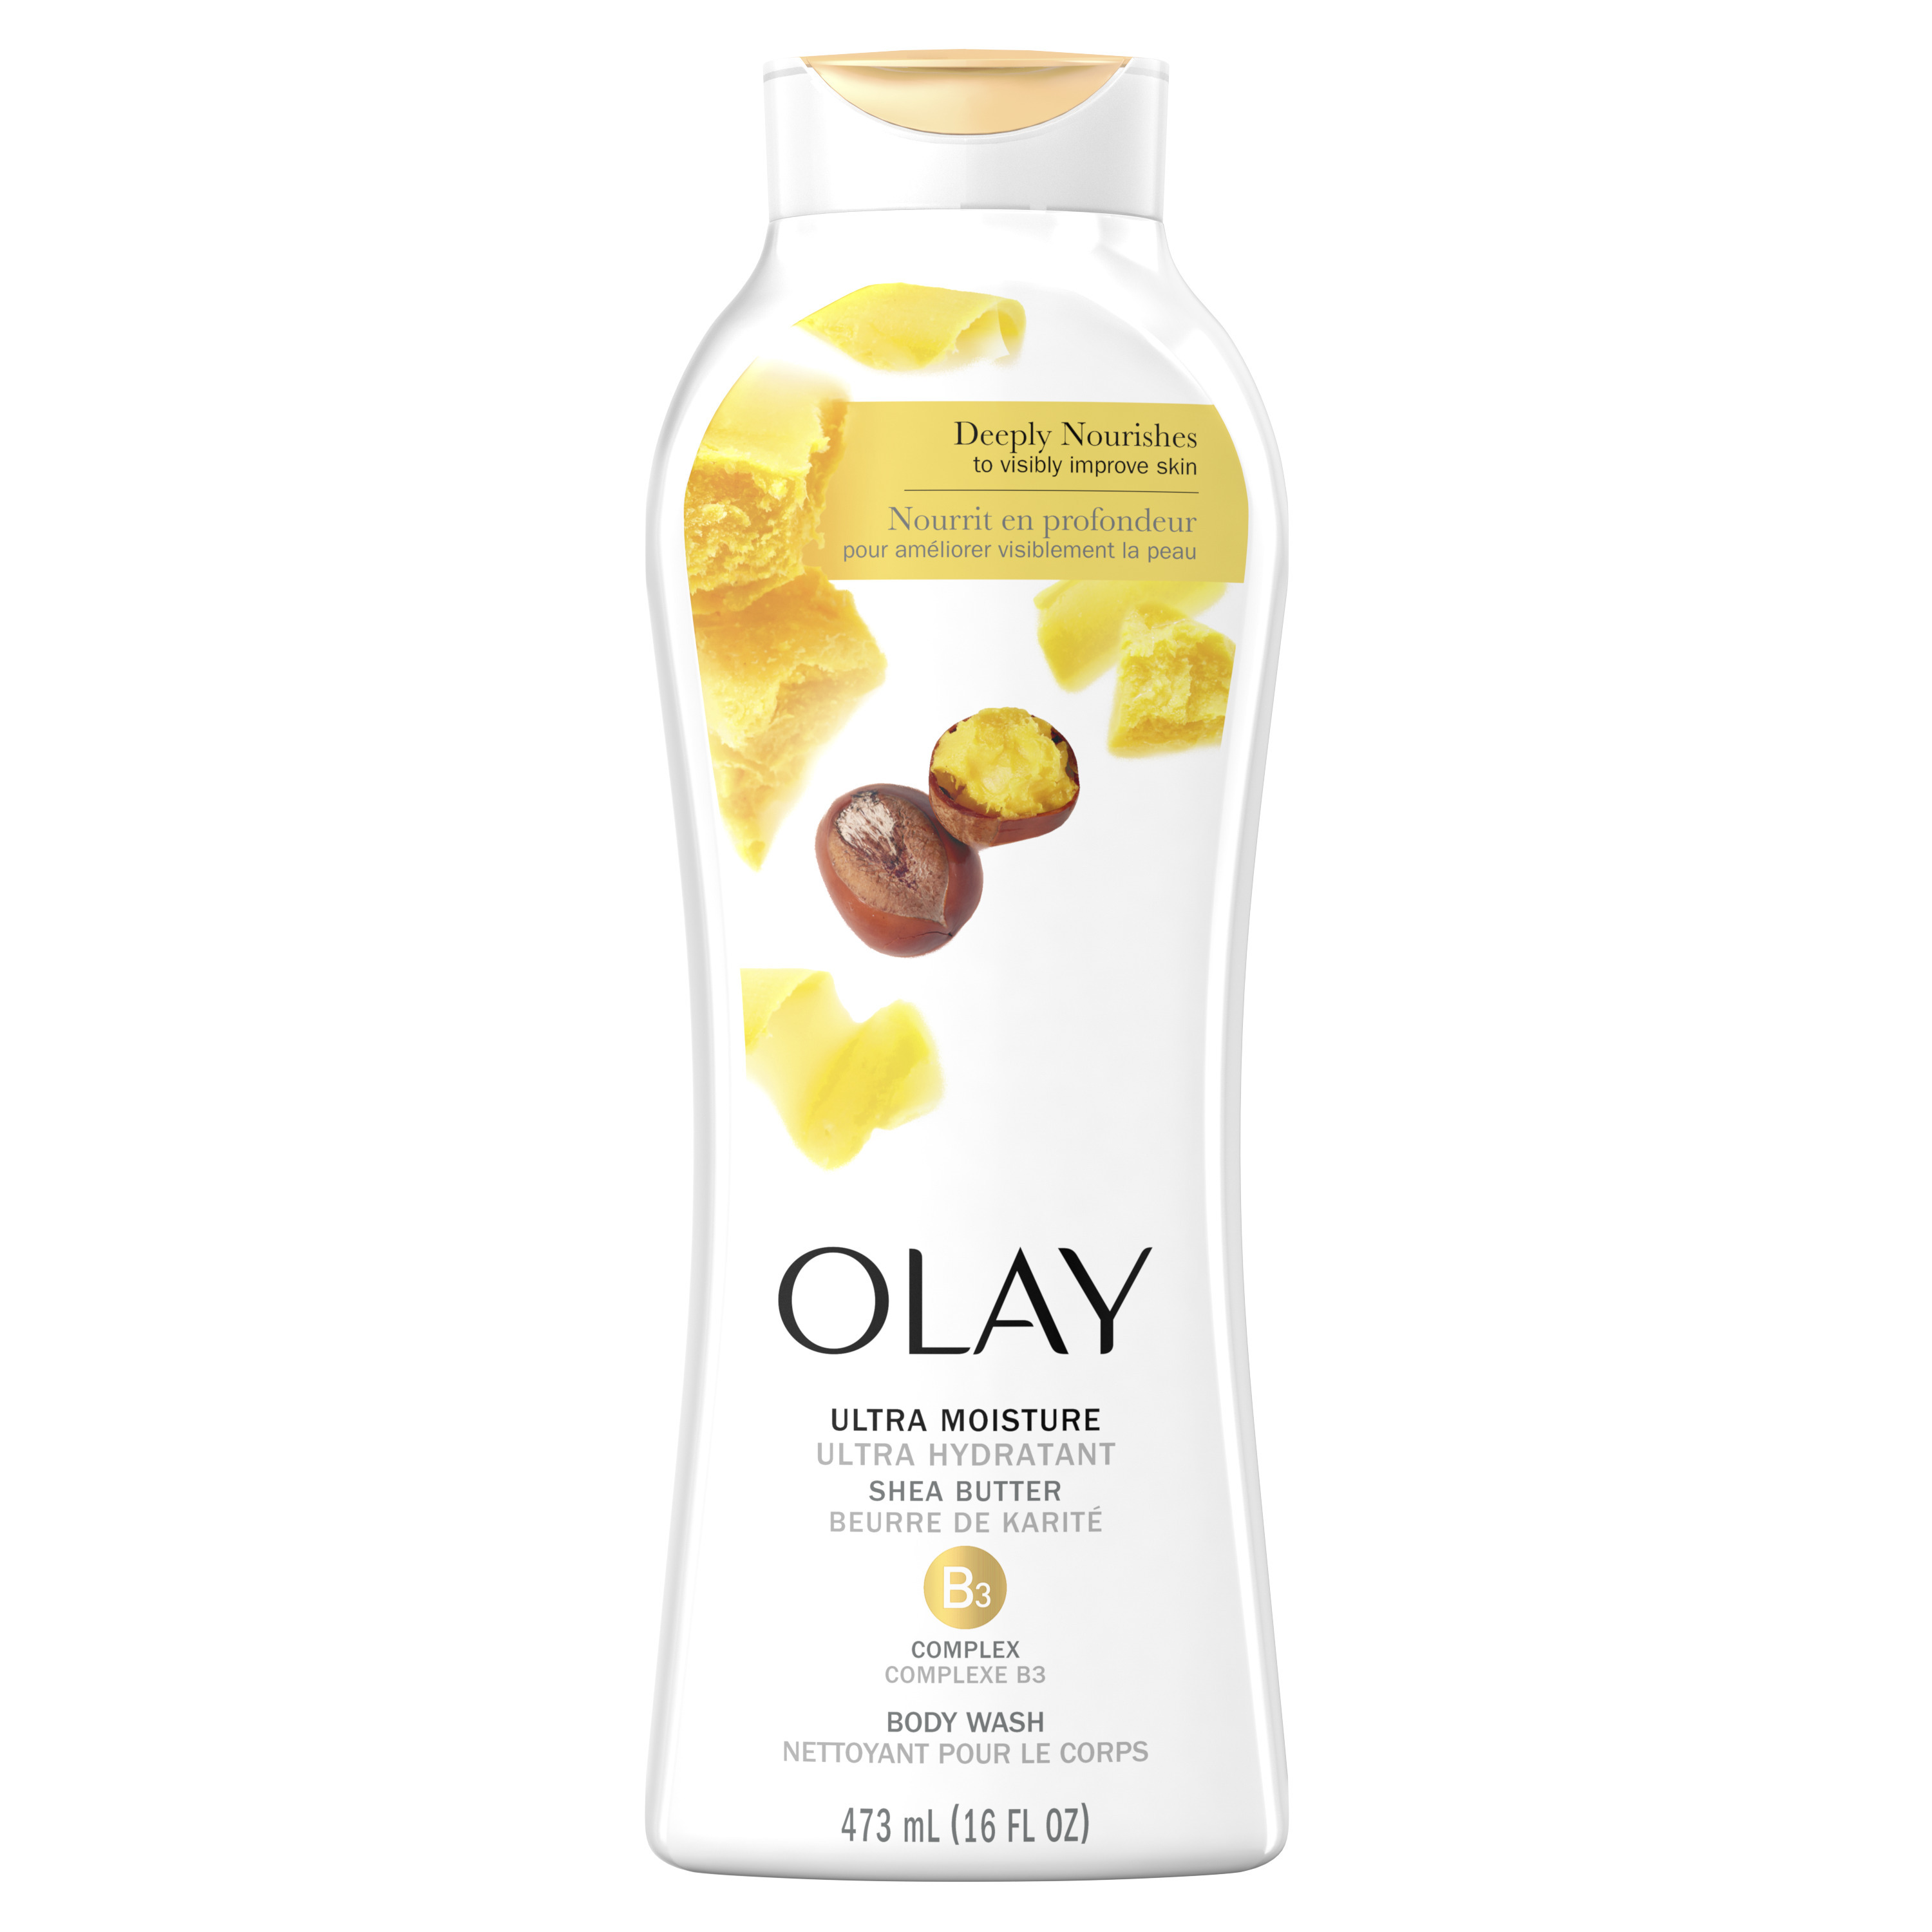 (Twin pack) Olay Ultra Moisture Shea Butter Body Wash, 2x16 oz - image 1 of 7